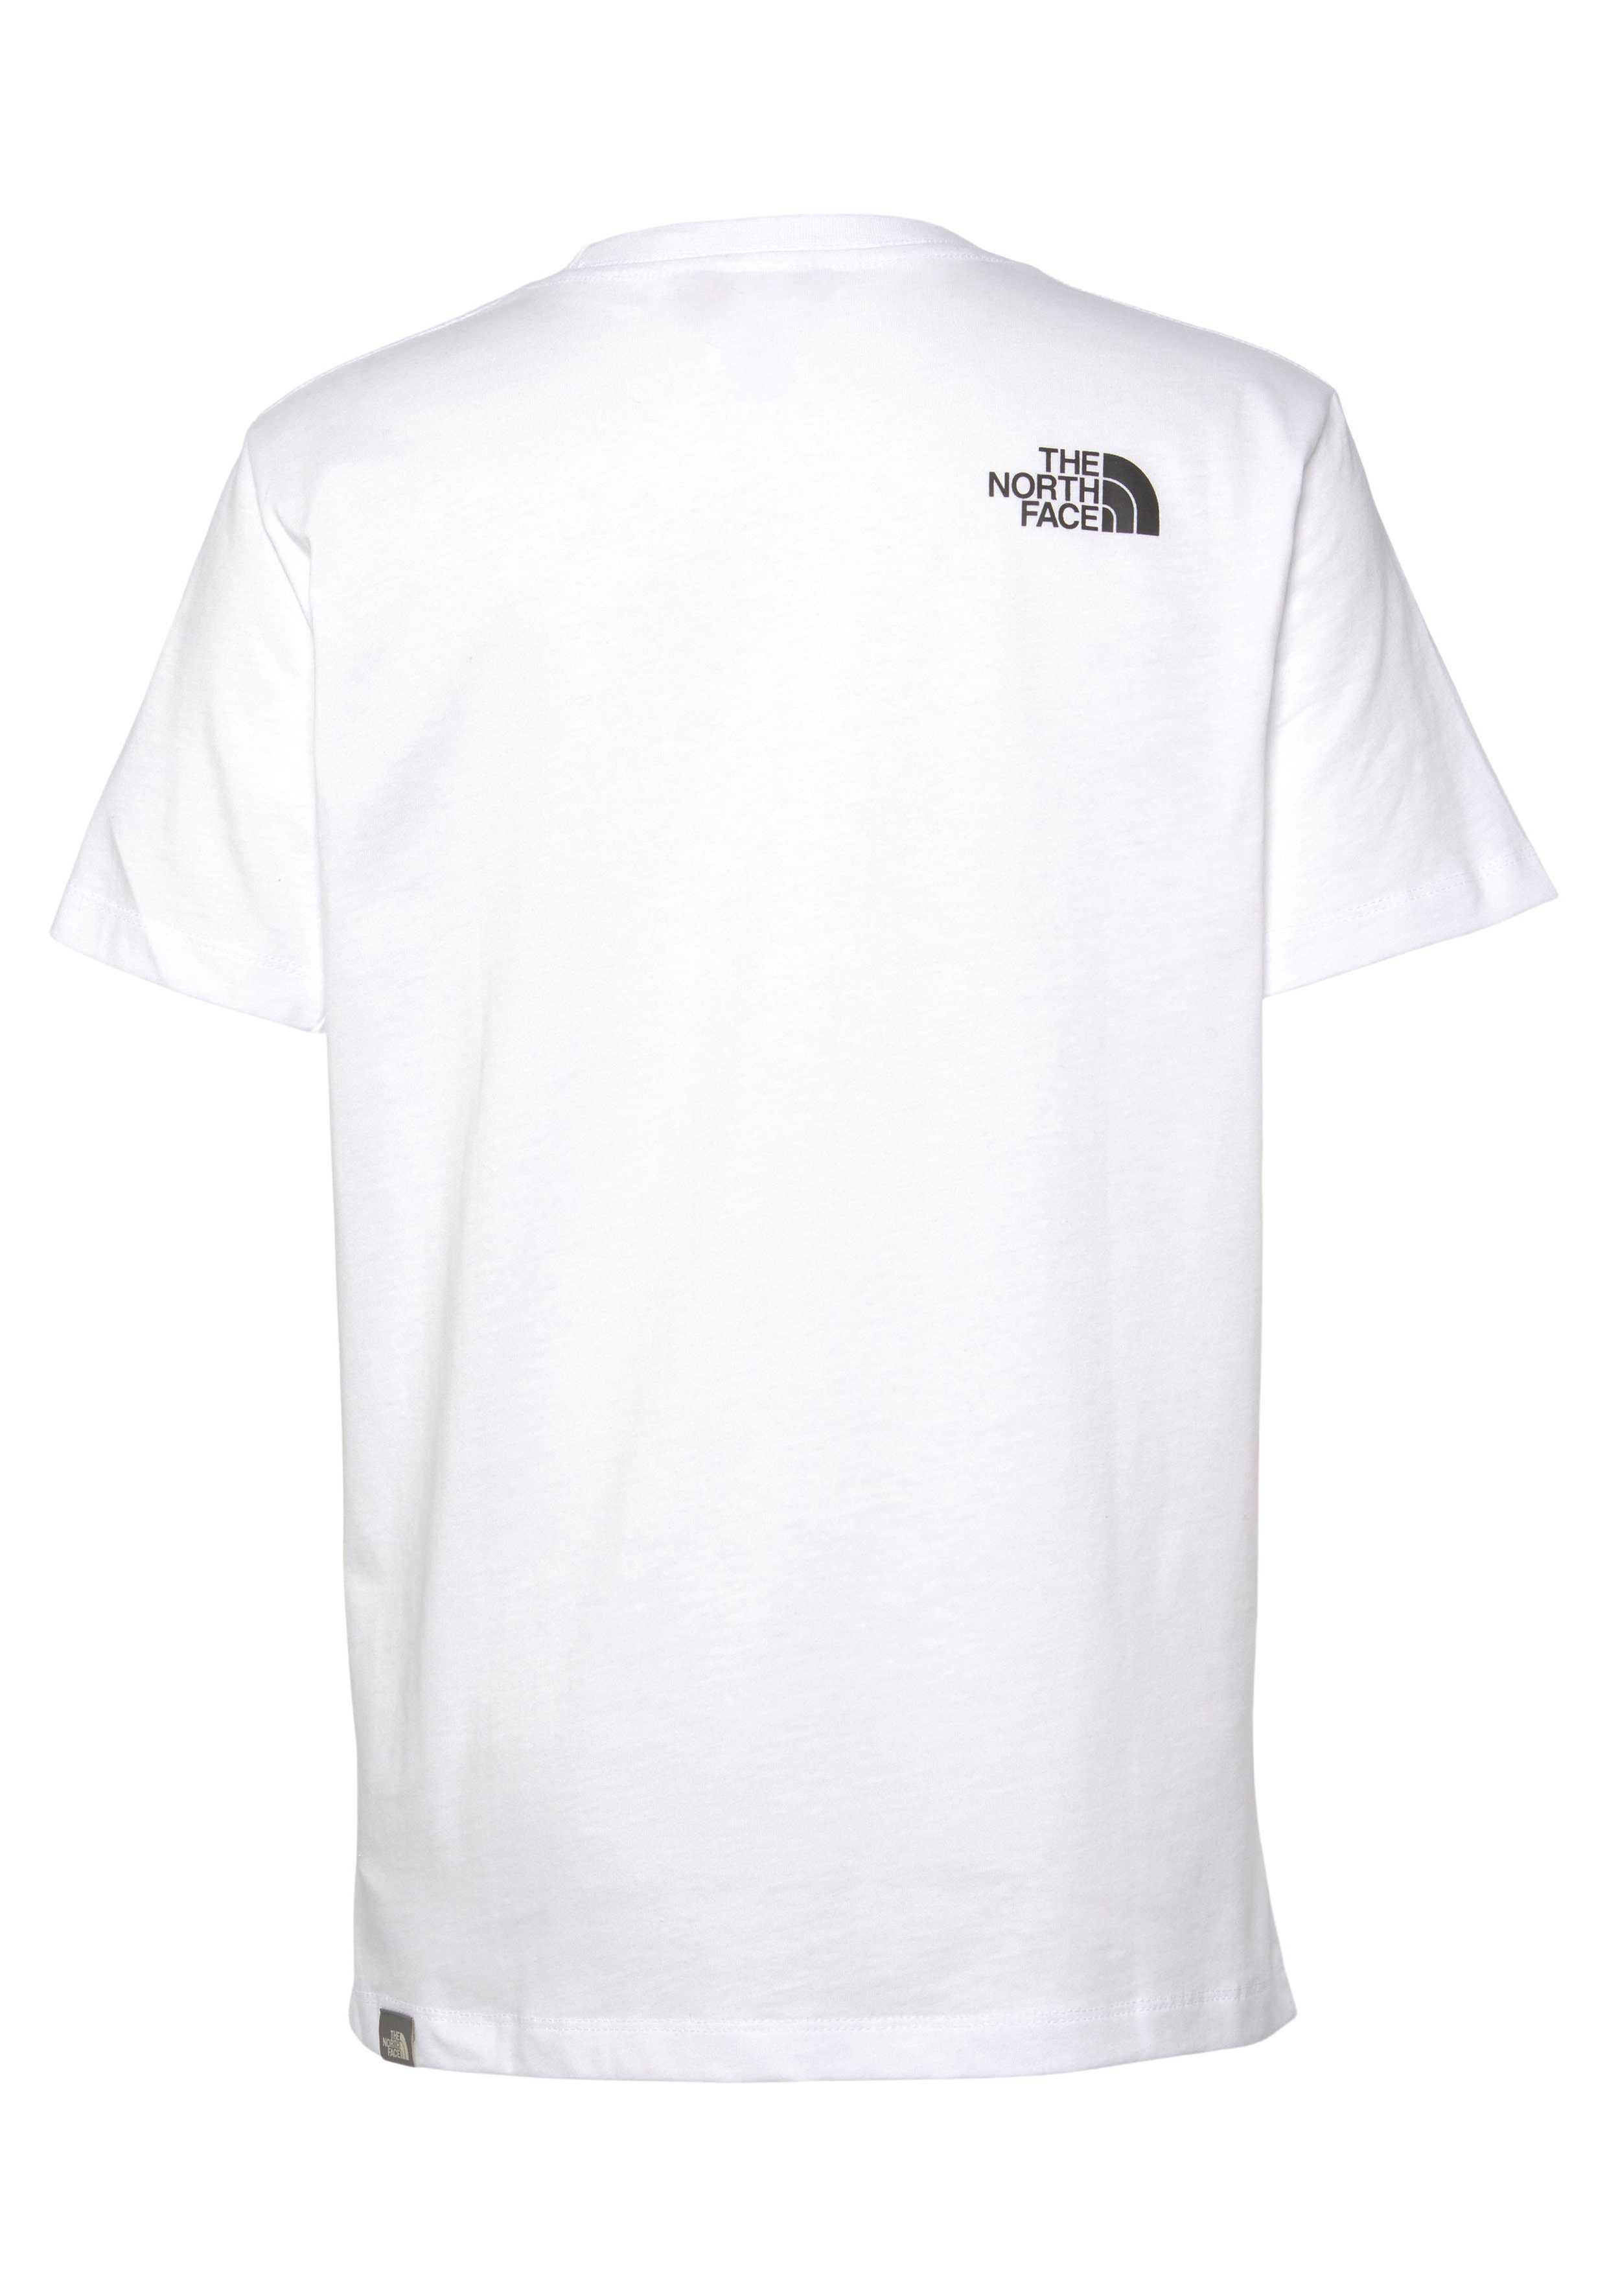 The Kinder North TEE EASY white - T-Shirt Face für